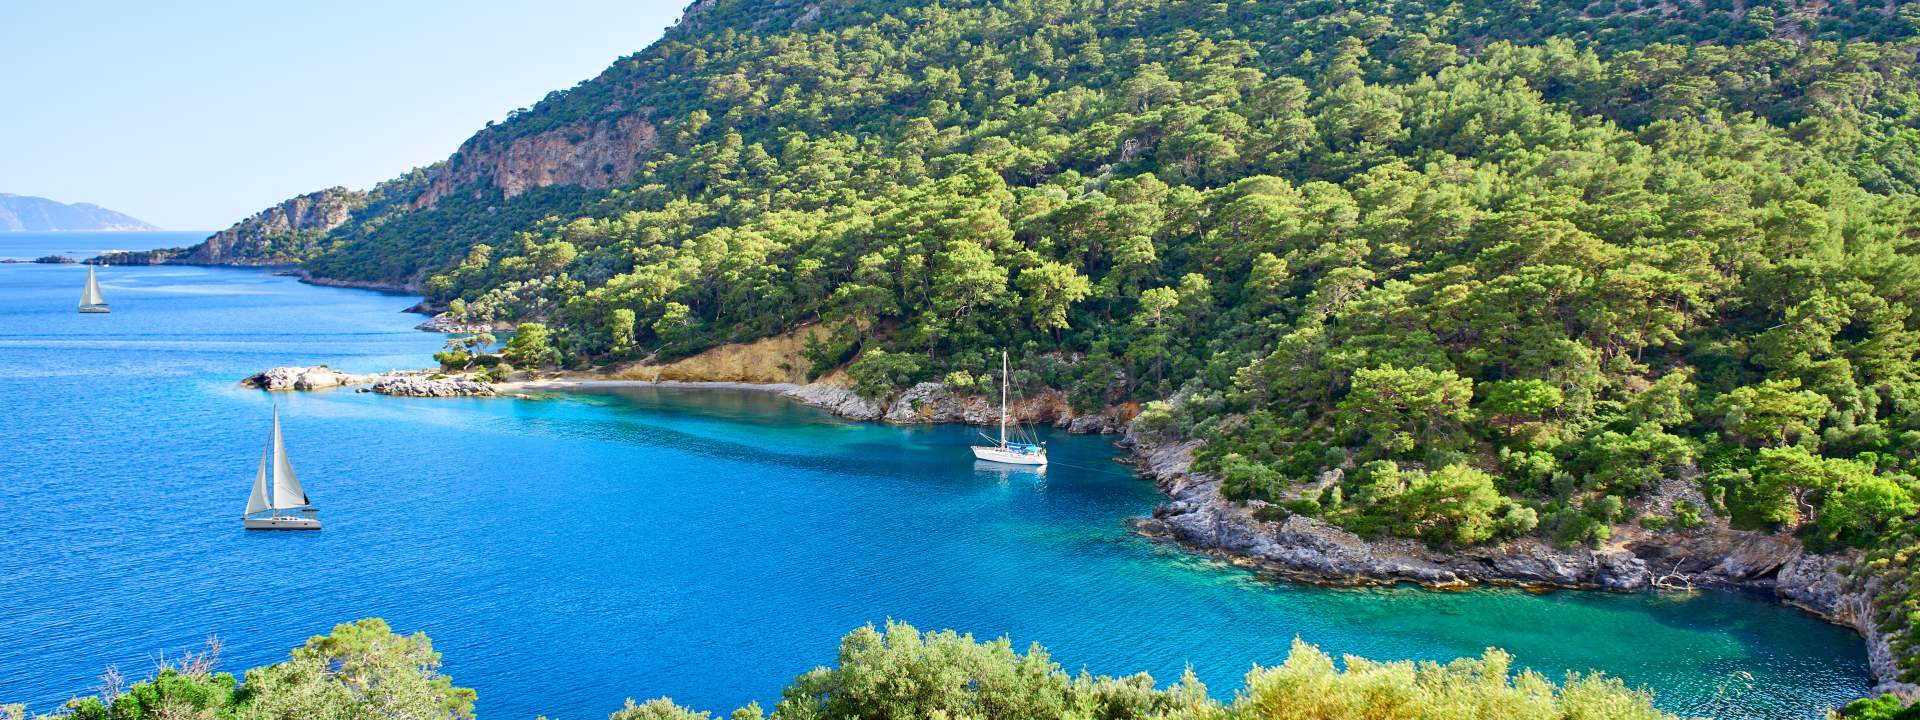 Explore Turkey on a traditional gulet cruise